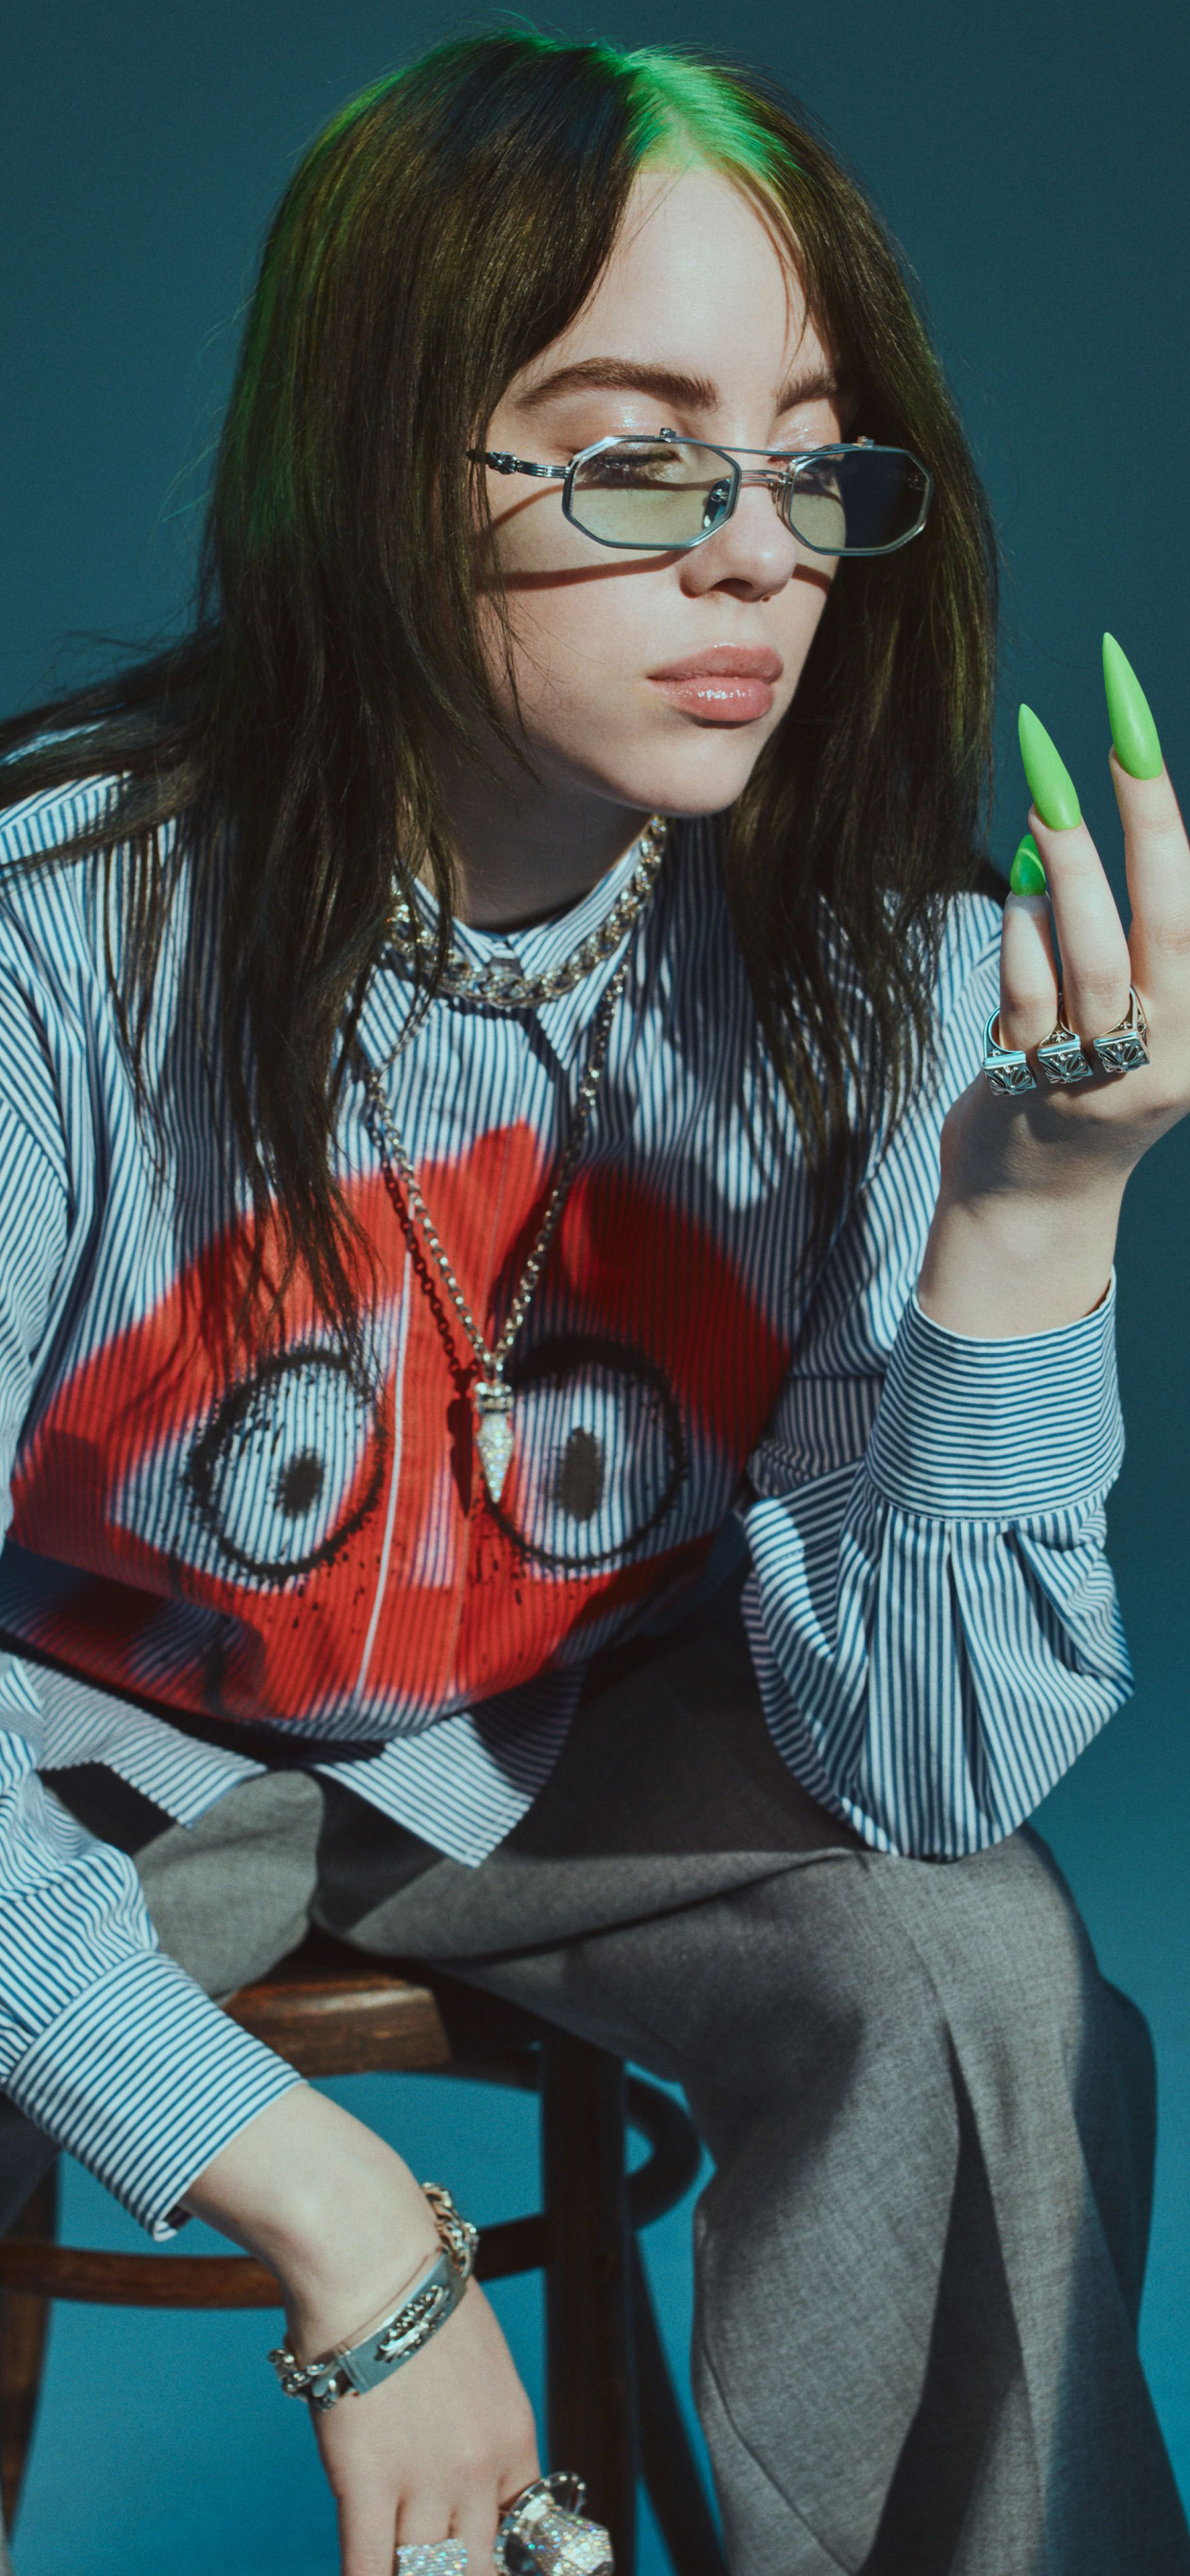 1242x2688 Billie Eilish Glasses Iphone Xs Max Wallpaper Hd Celebrities 4k Wallpapers Images Photos And Background